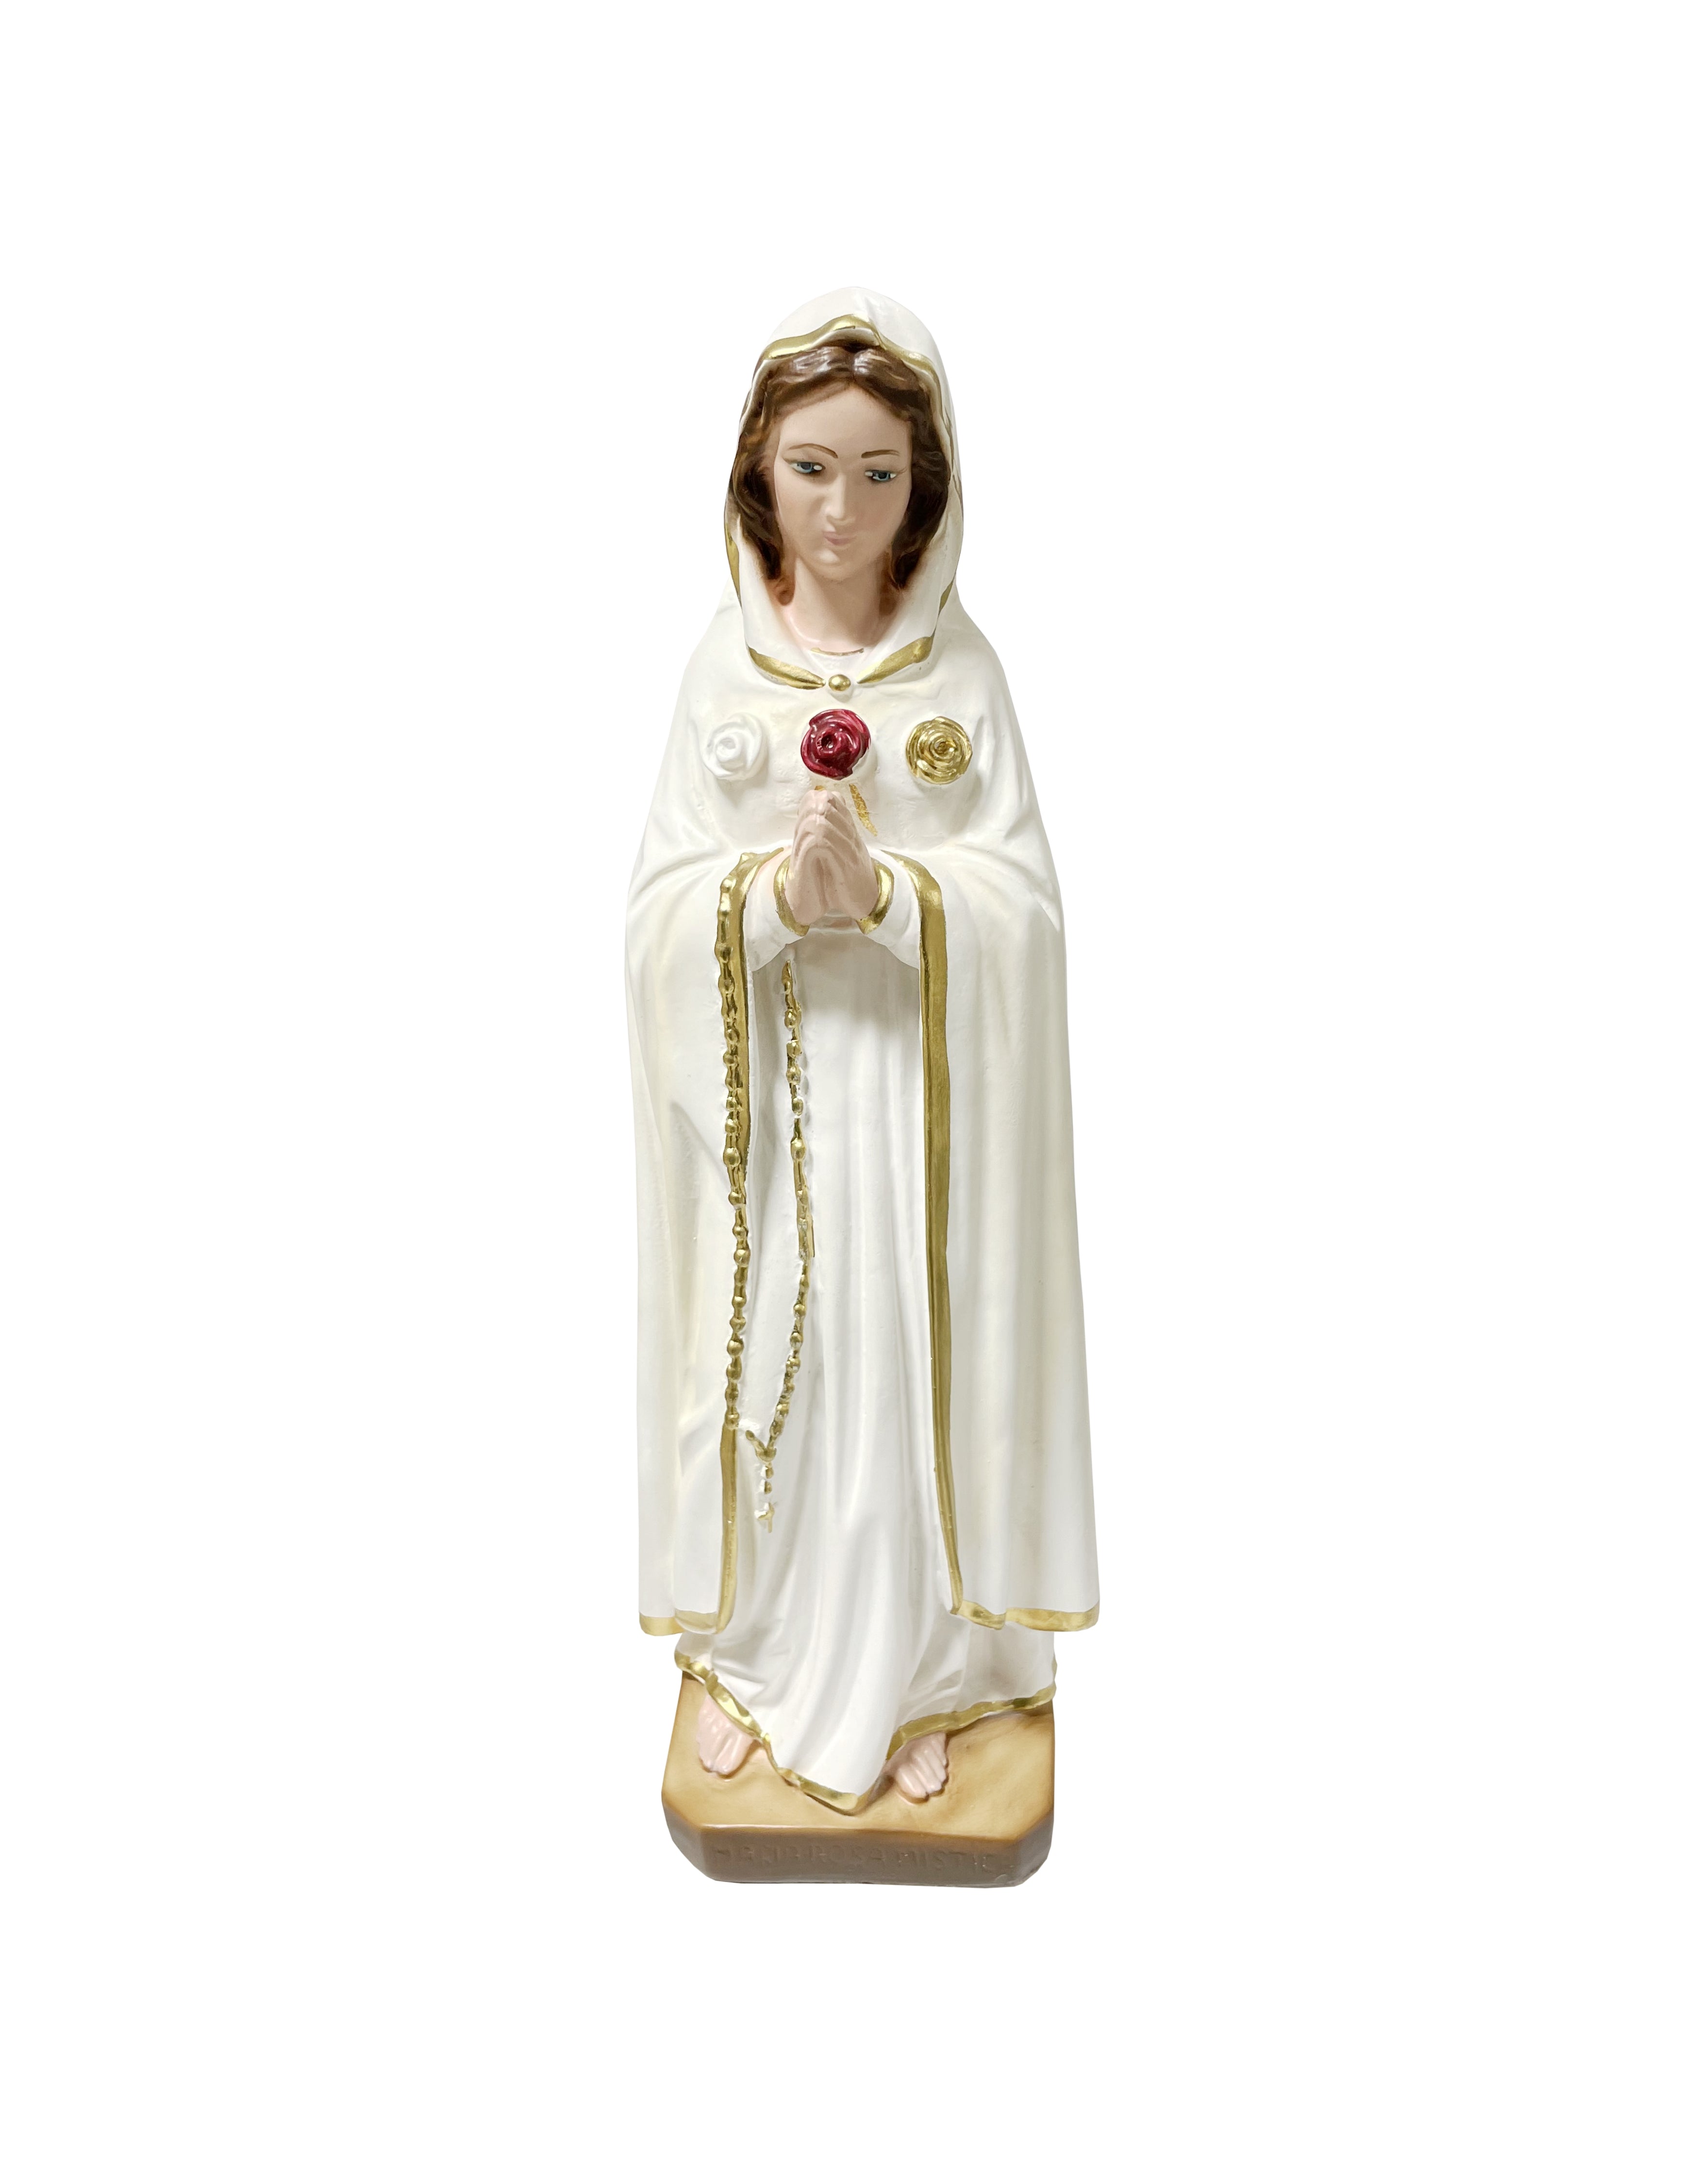 Religious statue of Our Lady of Mystic Rose 12" height